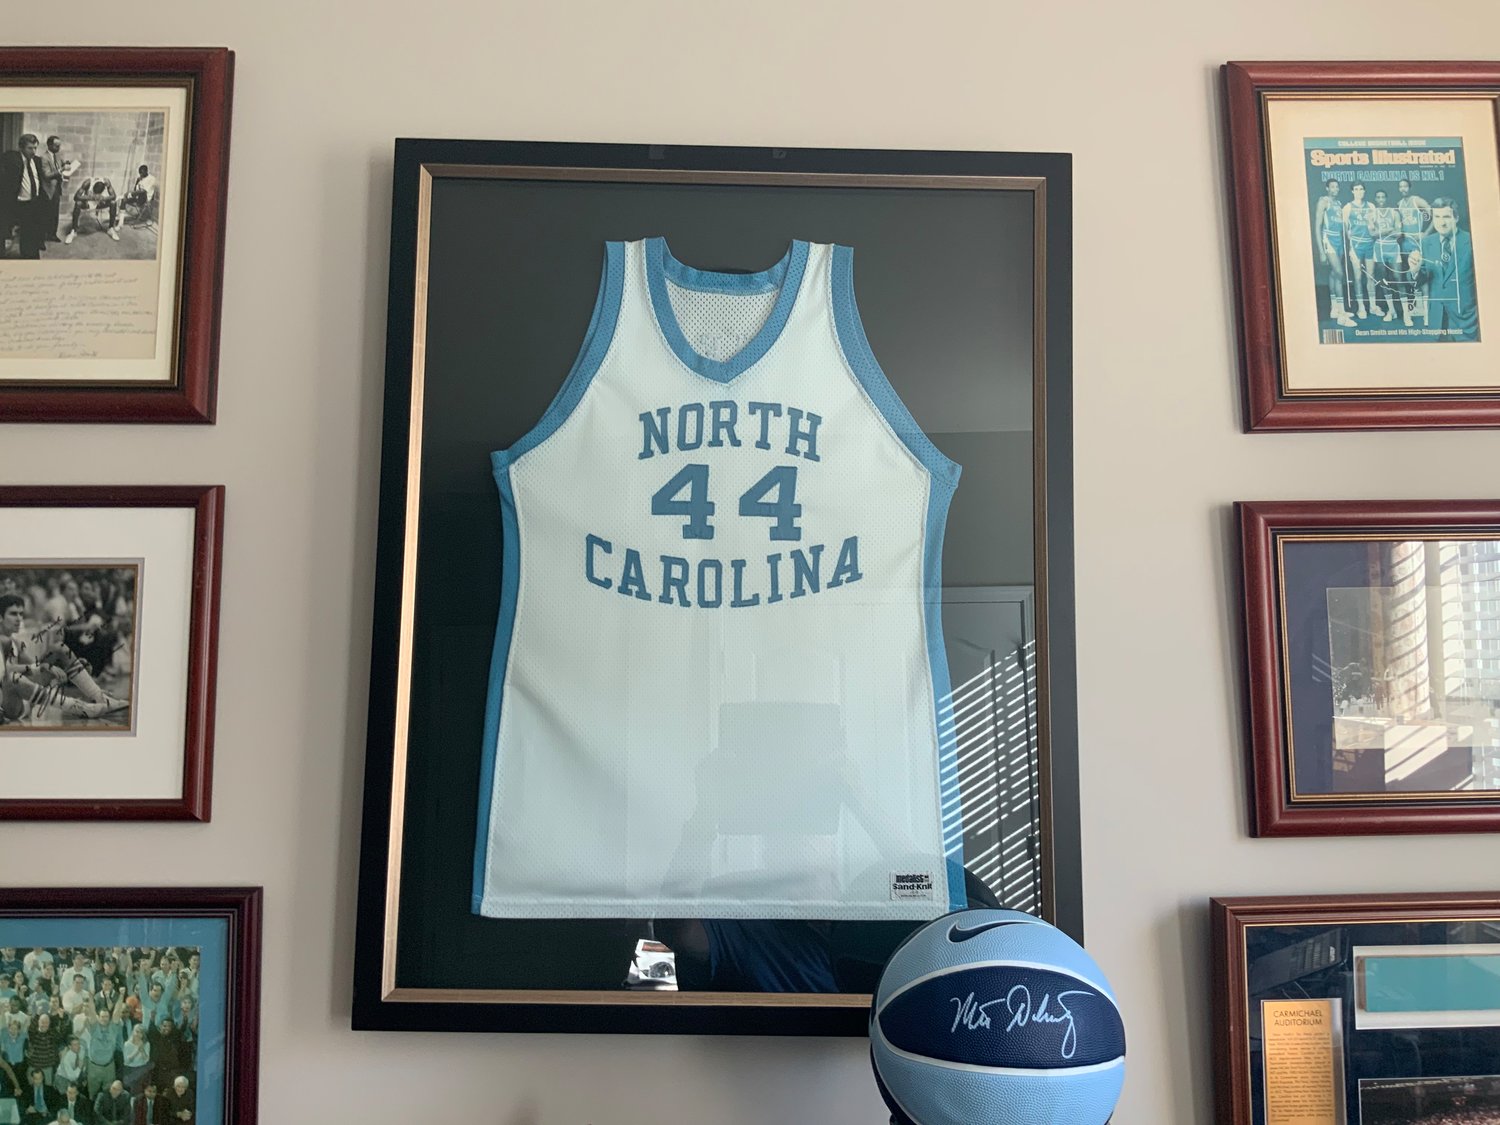 In Doherty’s home office, he displays his UNC jersey among other memorabilia from his basketball career.